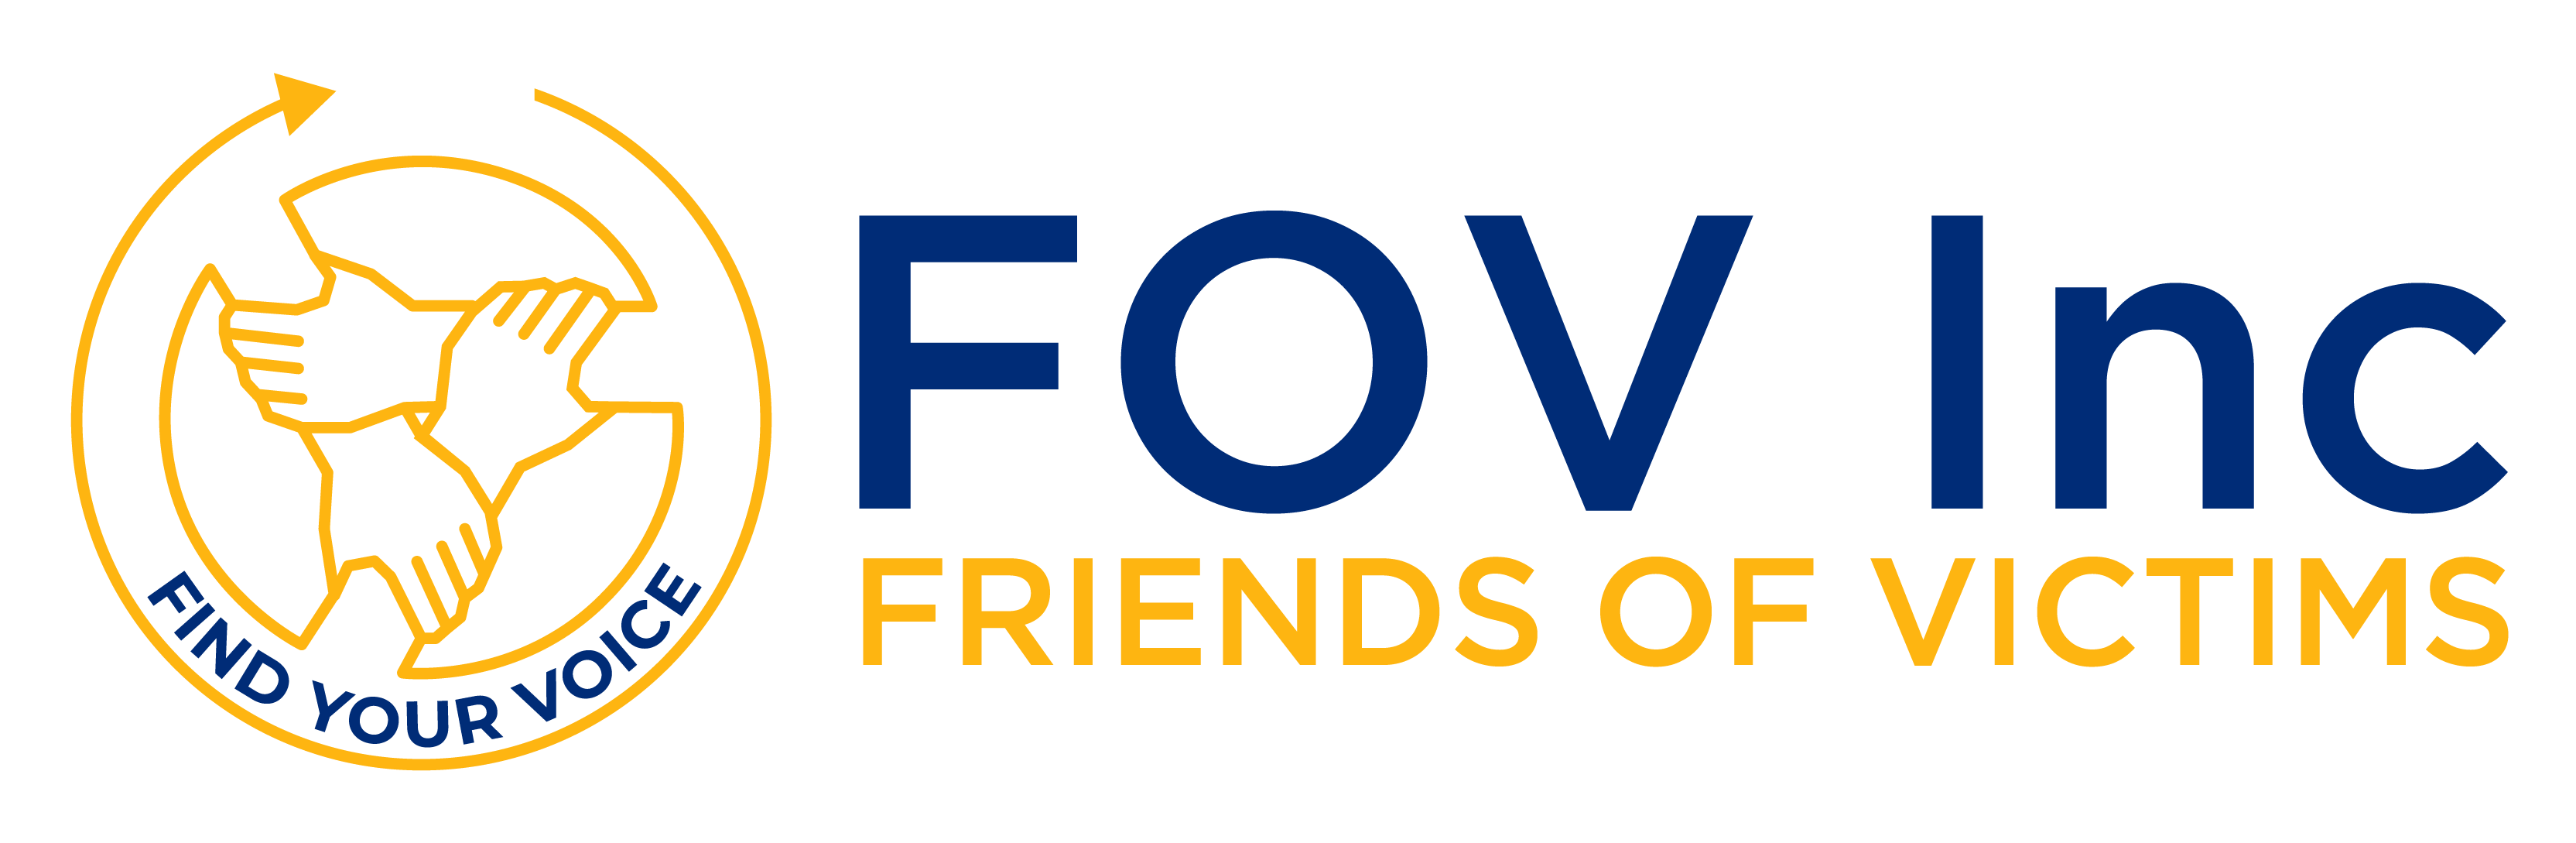 Friends of Victims